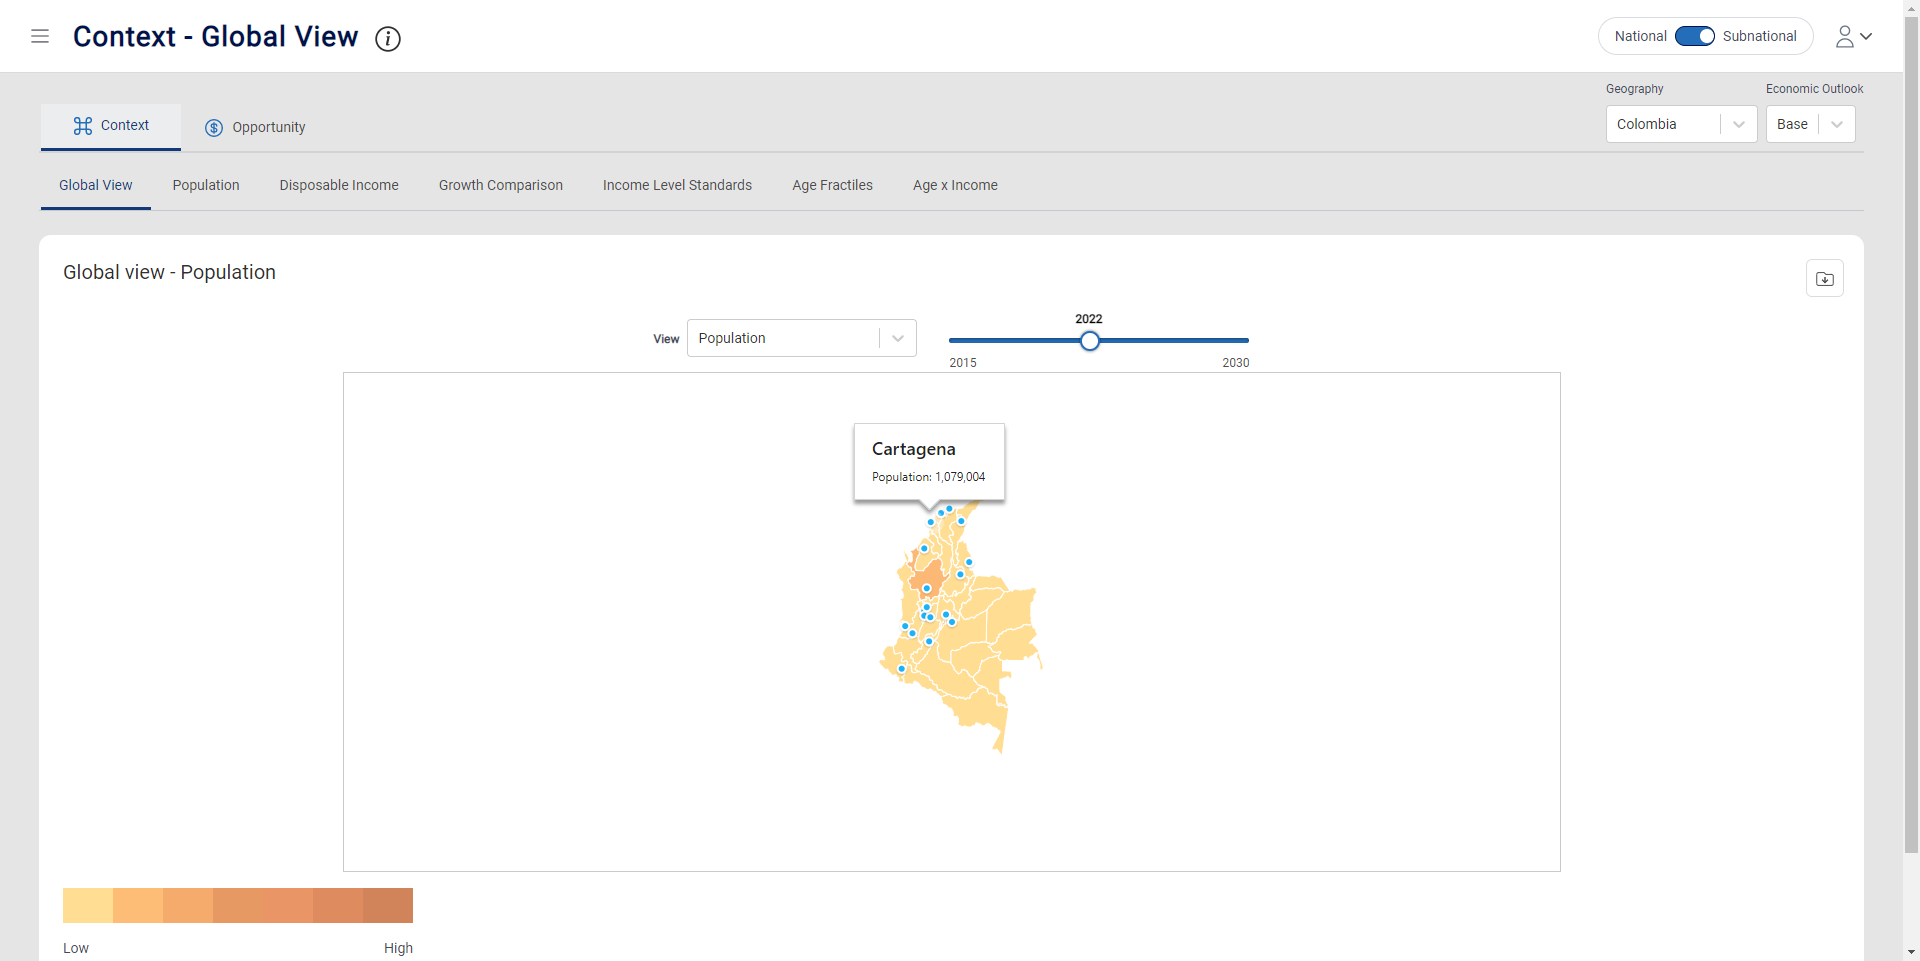 All contextual data is available at the subdivision and city level within a country.